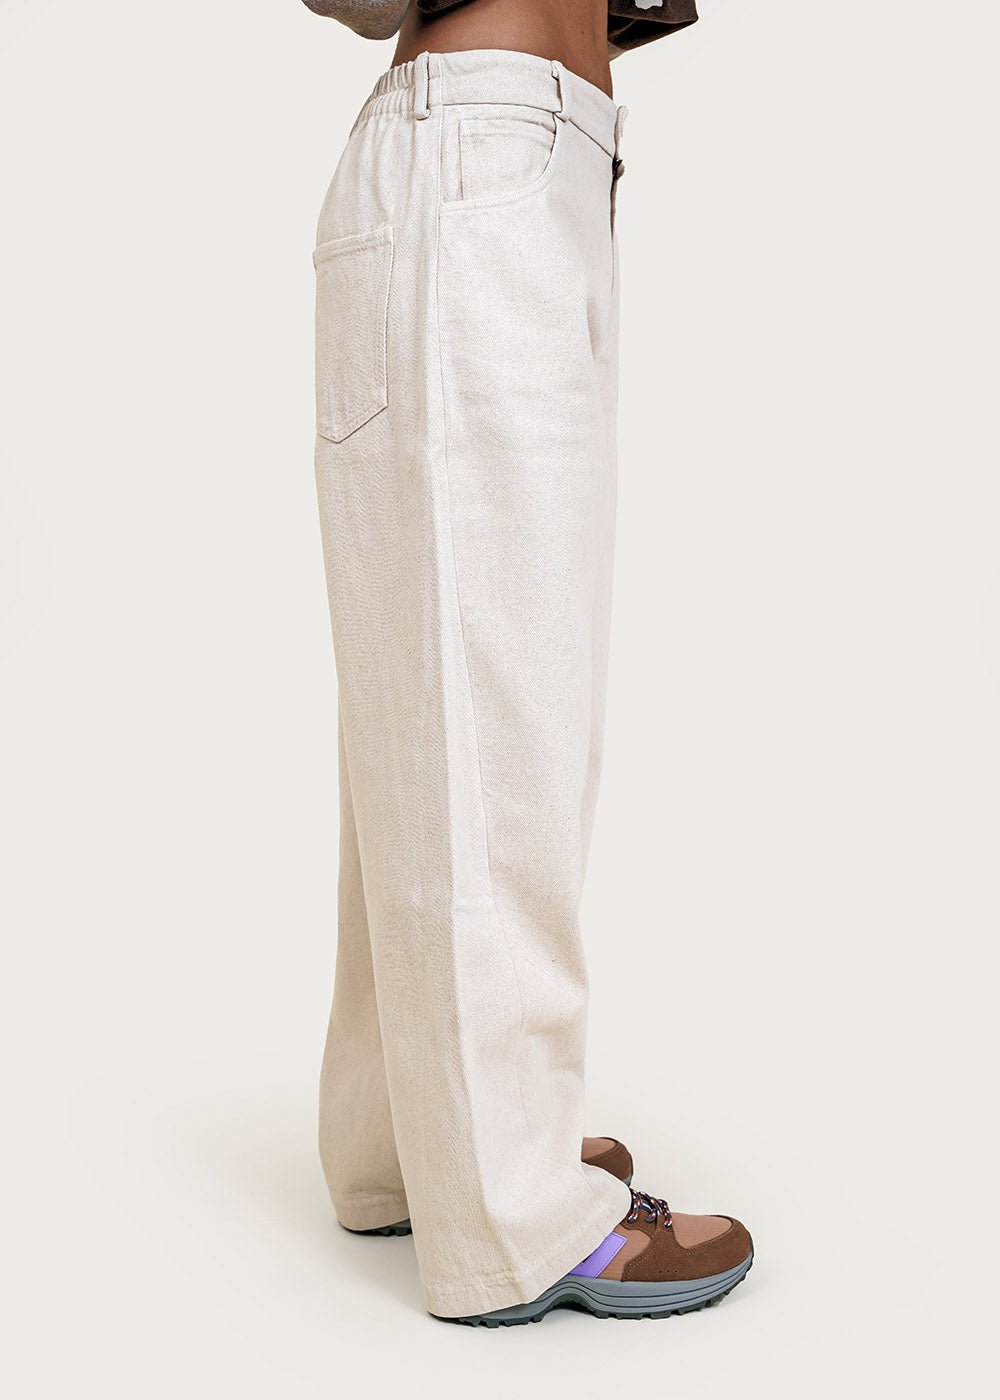 Cordera Natural Straight Pants - New Classics Studios Sustainable Ethical Fashion Canada